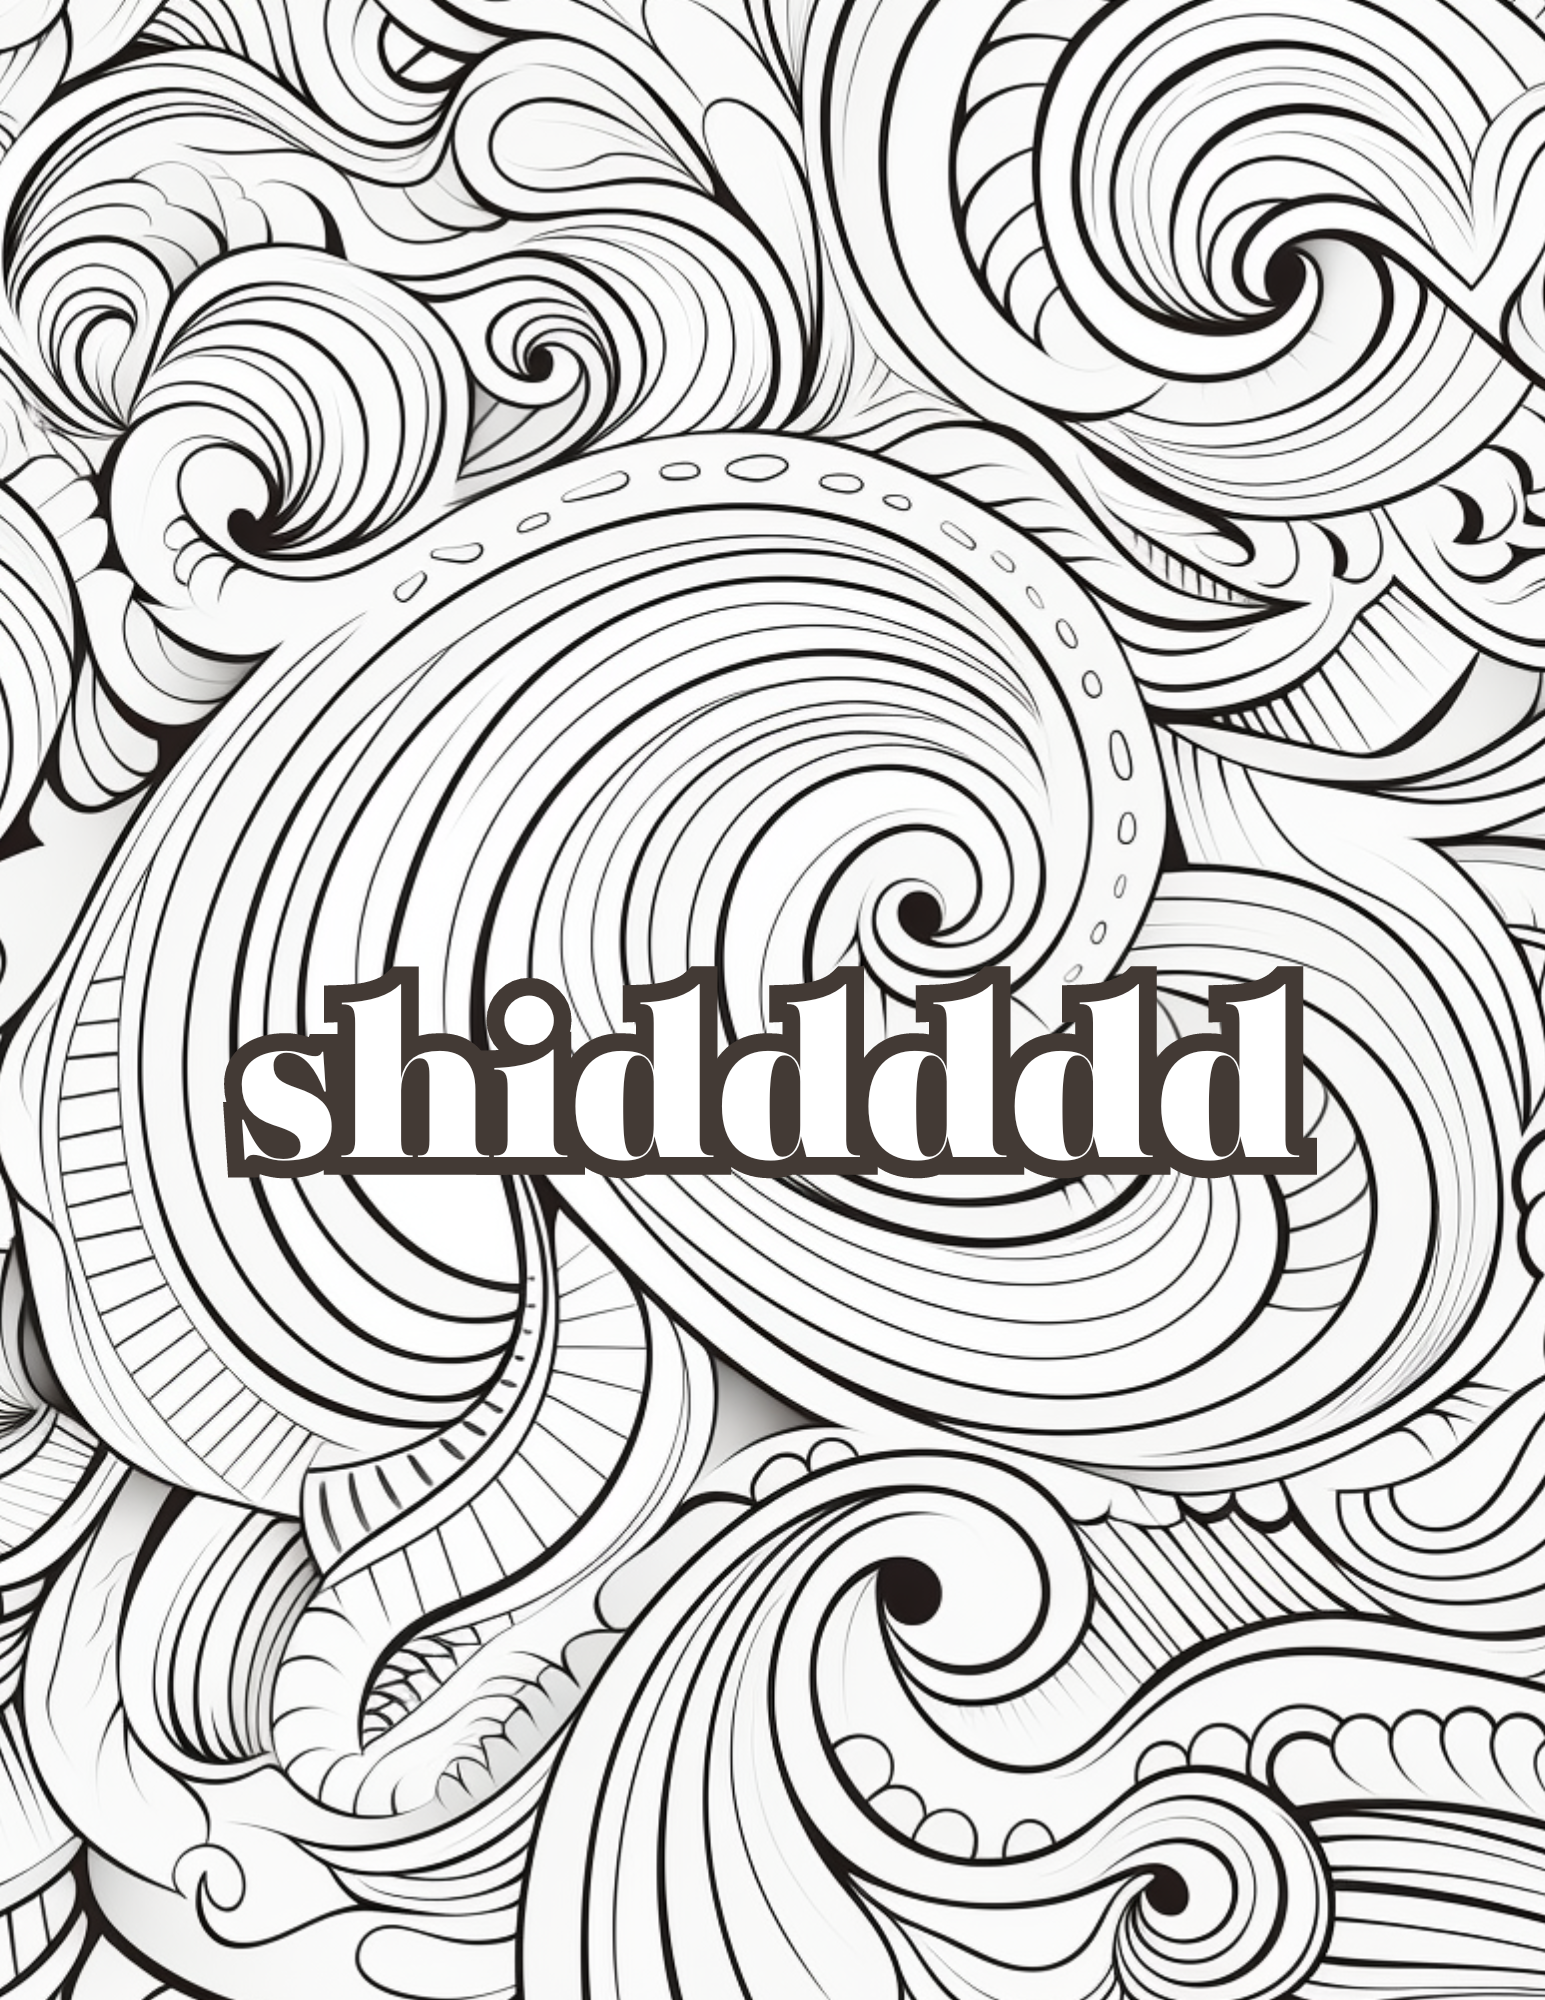 Swear Words Adult Coloring Book